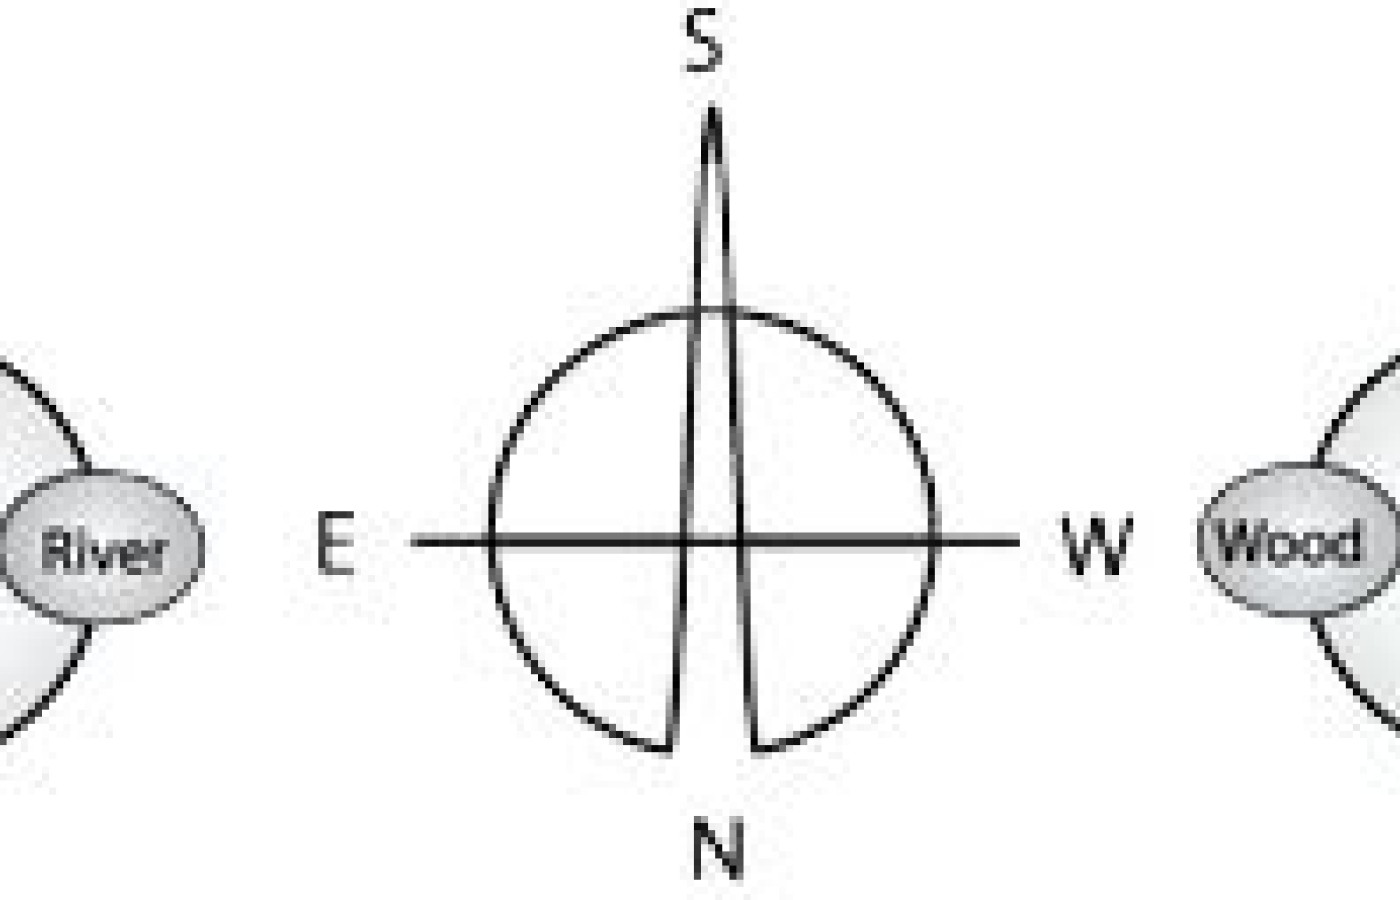 Diagram of the four cardinal directions